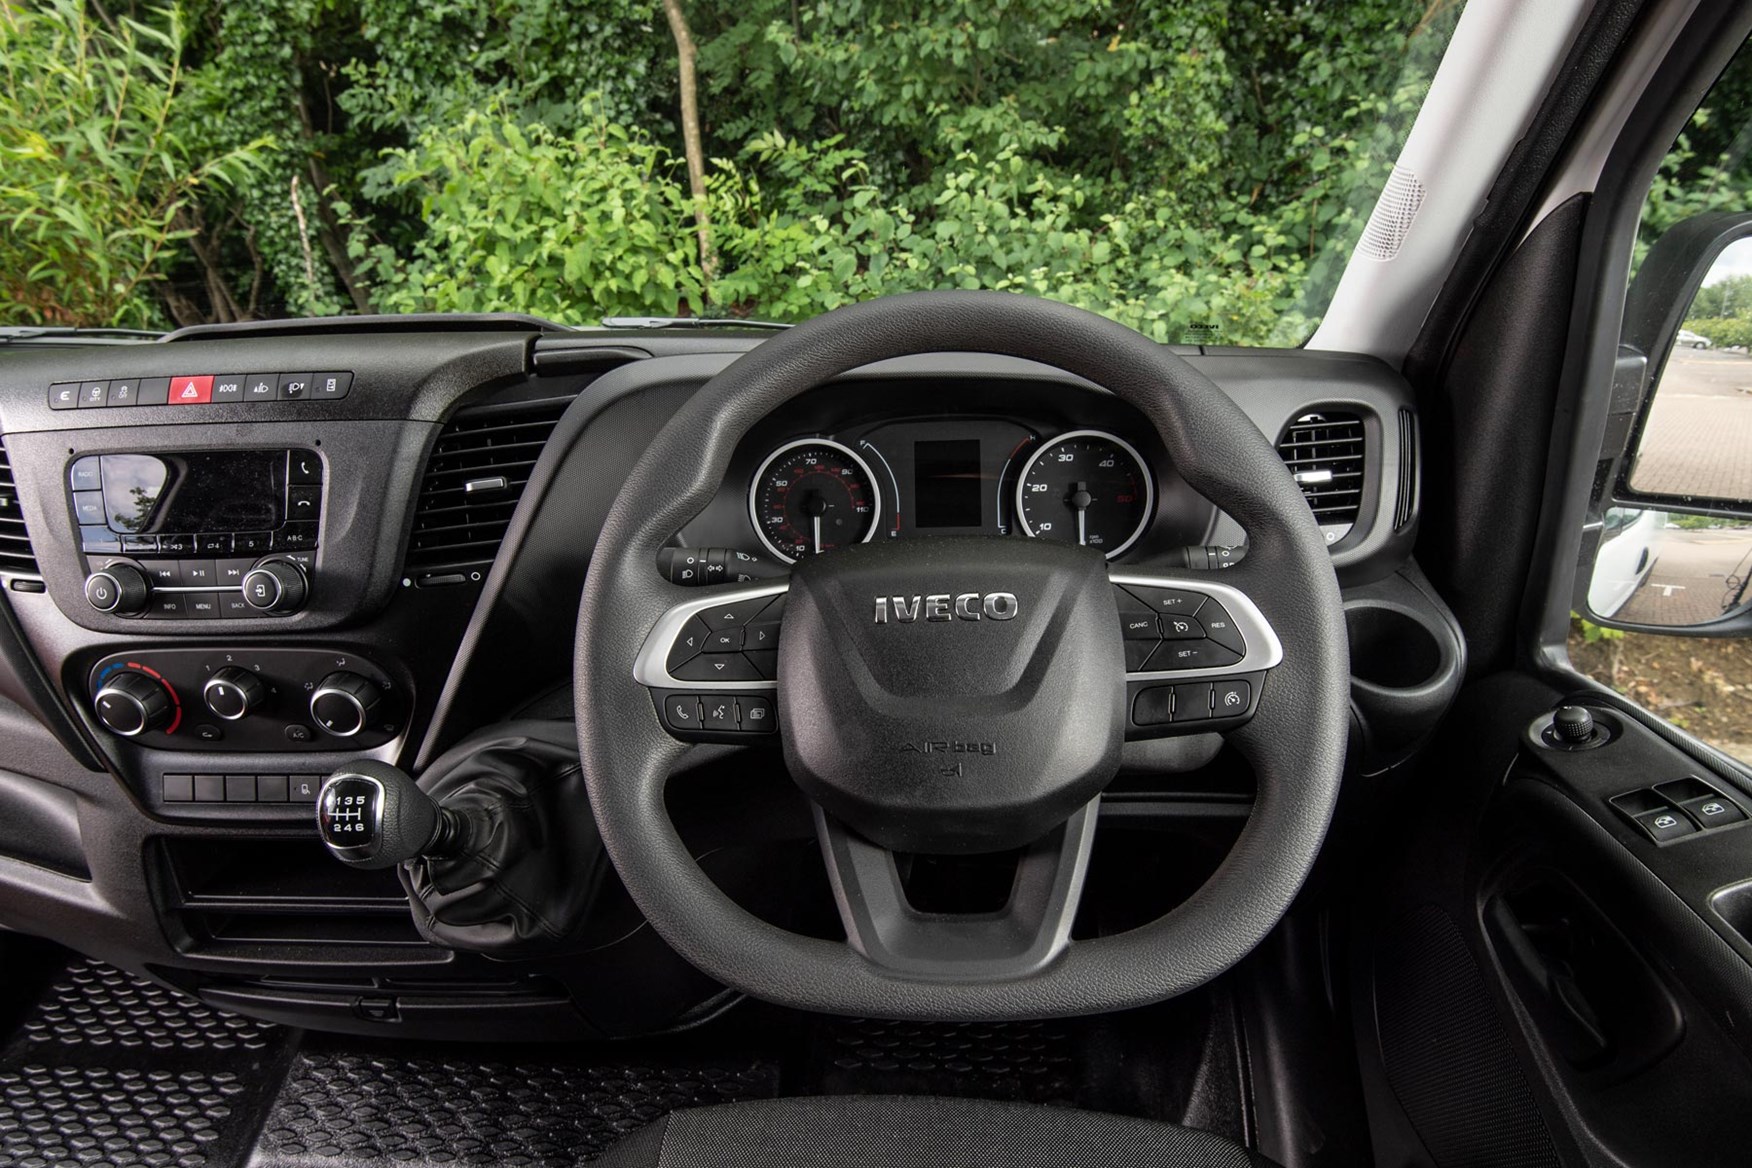 The Iveco Daily's steering wheel is small for a large van.